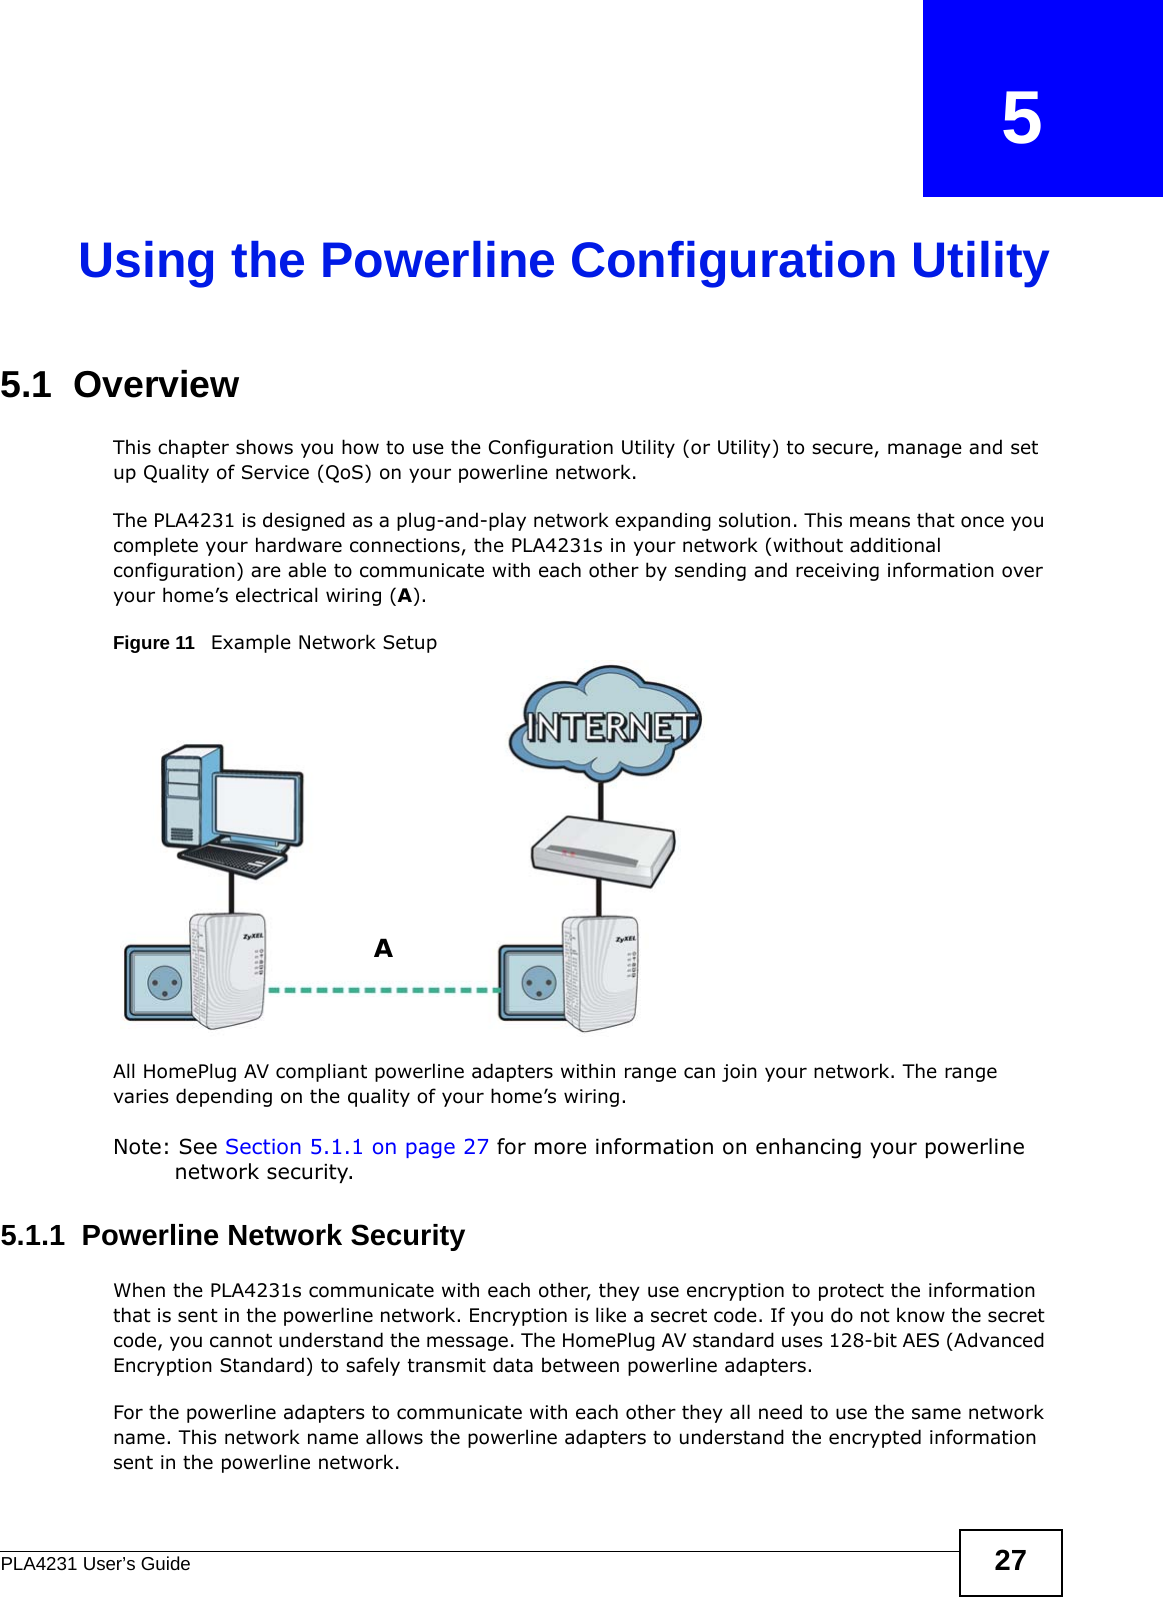 PLA4231 User’s Guide 27CHAPTER   5Using the Powerline Configuration Utility5.1  OverviewThis chapter shows you how to use the Configuration Utility (or Utility) to secure, manage and set up Quality of Service (QoS) on your powerline network.The PLA4231 is designed as a plug-and-play network expanding solution. This means that once you complete your hardware connections, the PLA4231s in your network (without additional configuration) are able to communicate with each other by sending and receiving information over your home’s electrical wiring (A).Figure 11   Example Network SetupAll HomePlug AV compliant powerline adapters within range can join your network. The range varies depending on the quality of your home’s wiring.Note: See Section 5.1.1 on page 27 for more information on enhancing your powerline network security.5.1.1  Powerline Network Security When the PLA4231s communicate with each other, they use encryption to protect the information that is sent in the powerline network. Encryption is like a secret code. If you do not know the secret code, you cannot understand the message. The HomePlug AV standard uses 128-bit AES (Advanced Encryption Standard) to safely transmit data between powerline adapters.For the powerline adapters to communicate with each other they all need to use the same network name. This network name allows the powerline adapters to understand the encrypted information sent in the powerline network. A